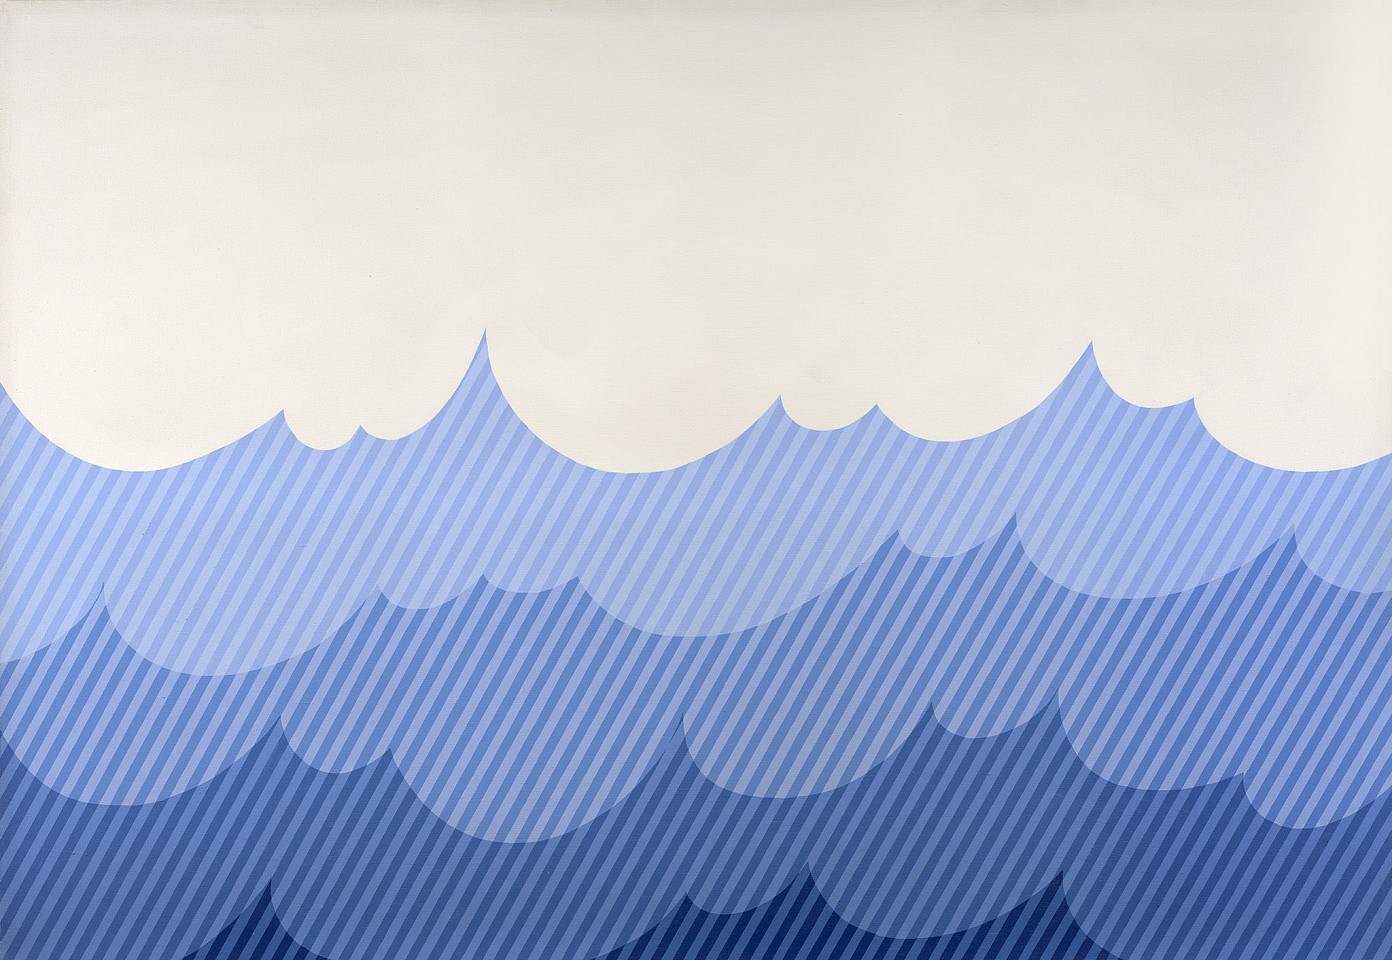 Mary Dill Henry, Mendocino Seascape: Clear Except for Isolated Flowers, 1971
Acrylic on canvas, 48 x 72 in. (121.9 x 182.9 cm)
MHEN-00152